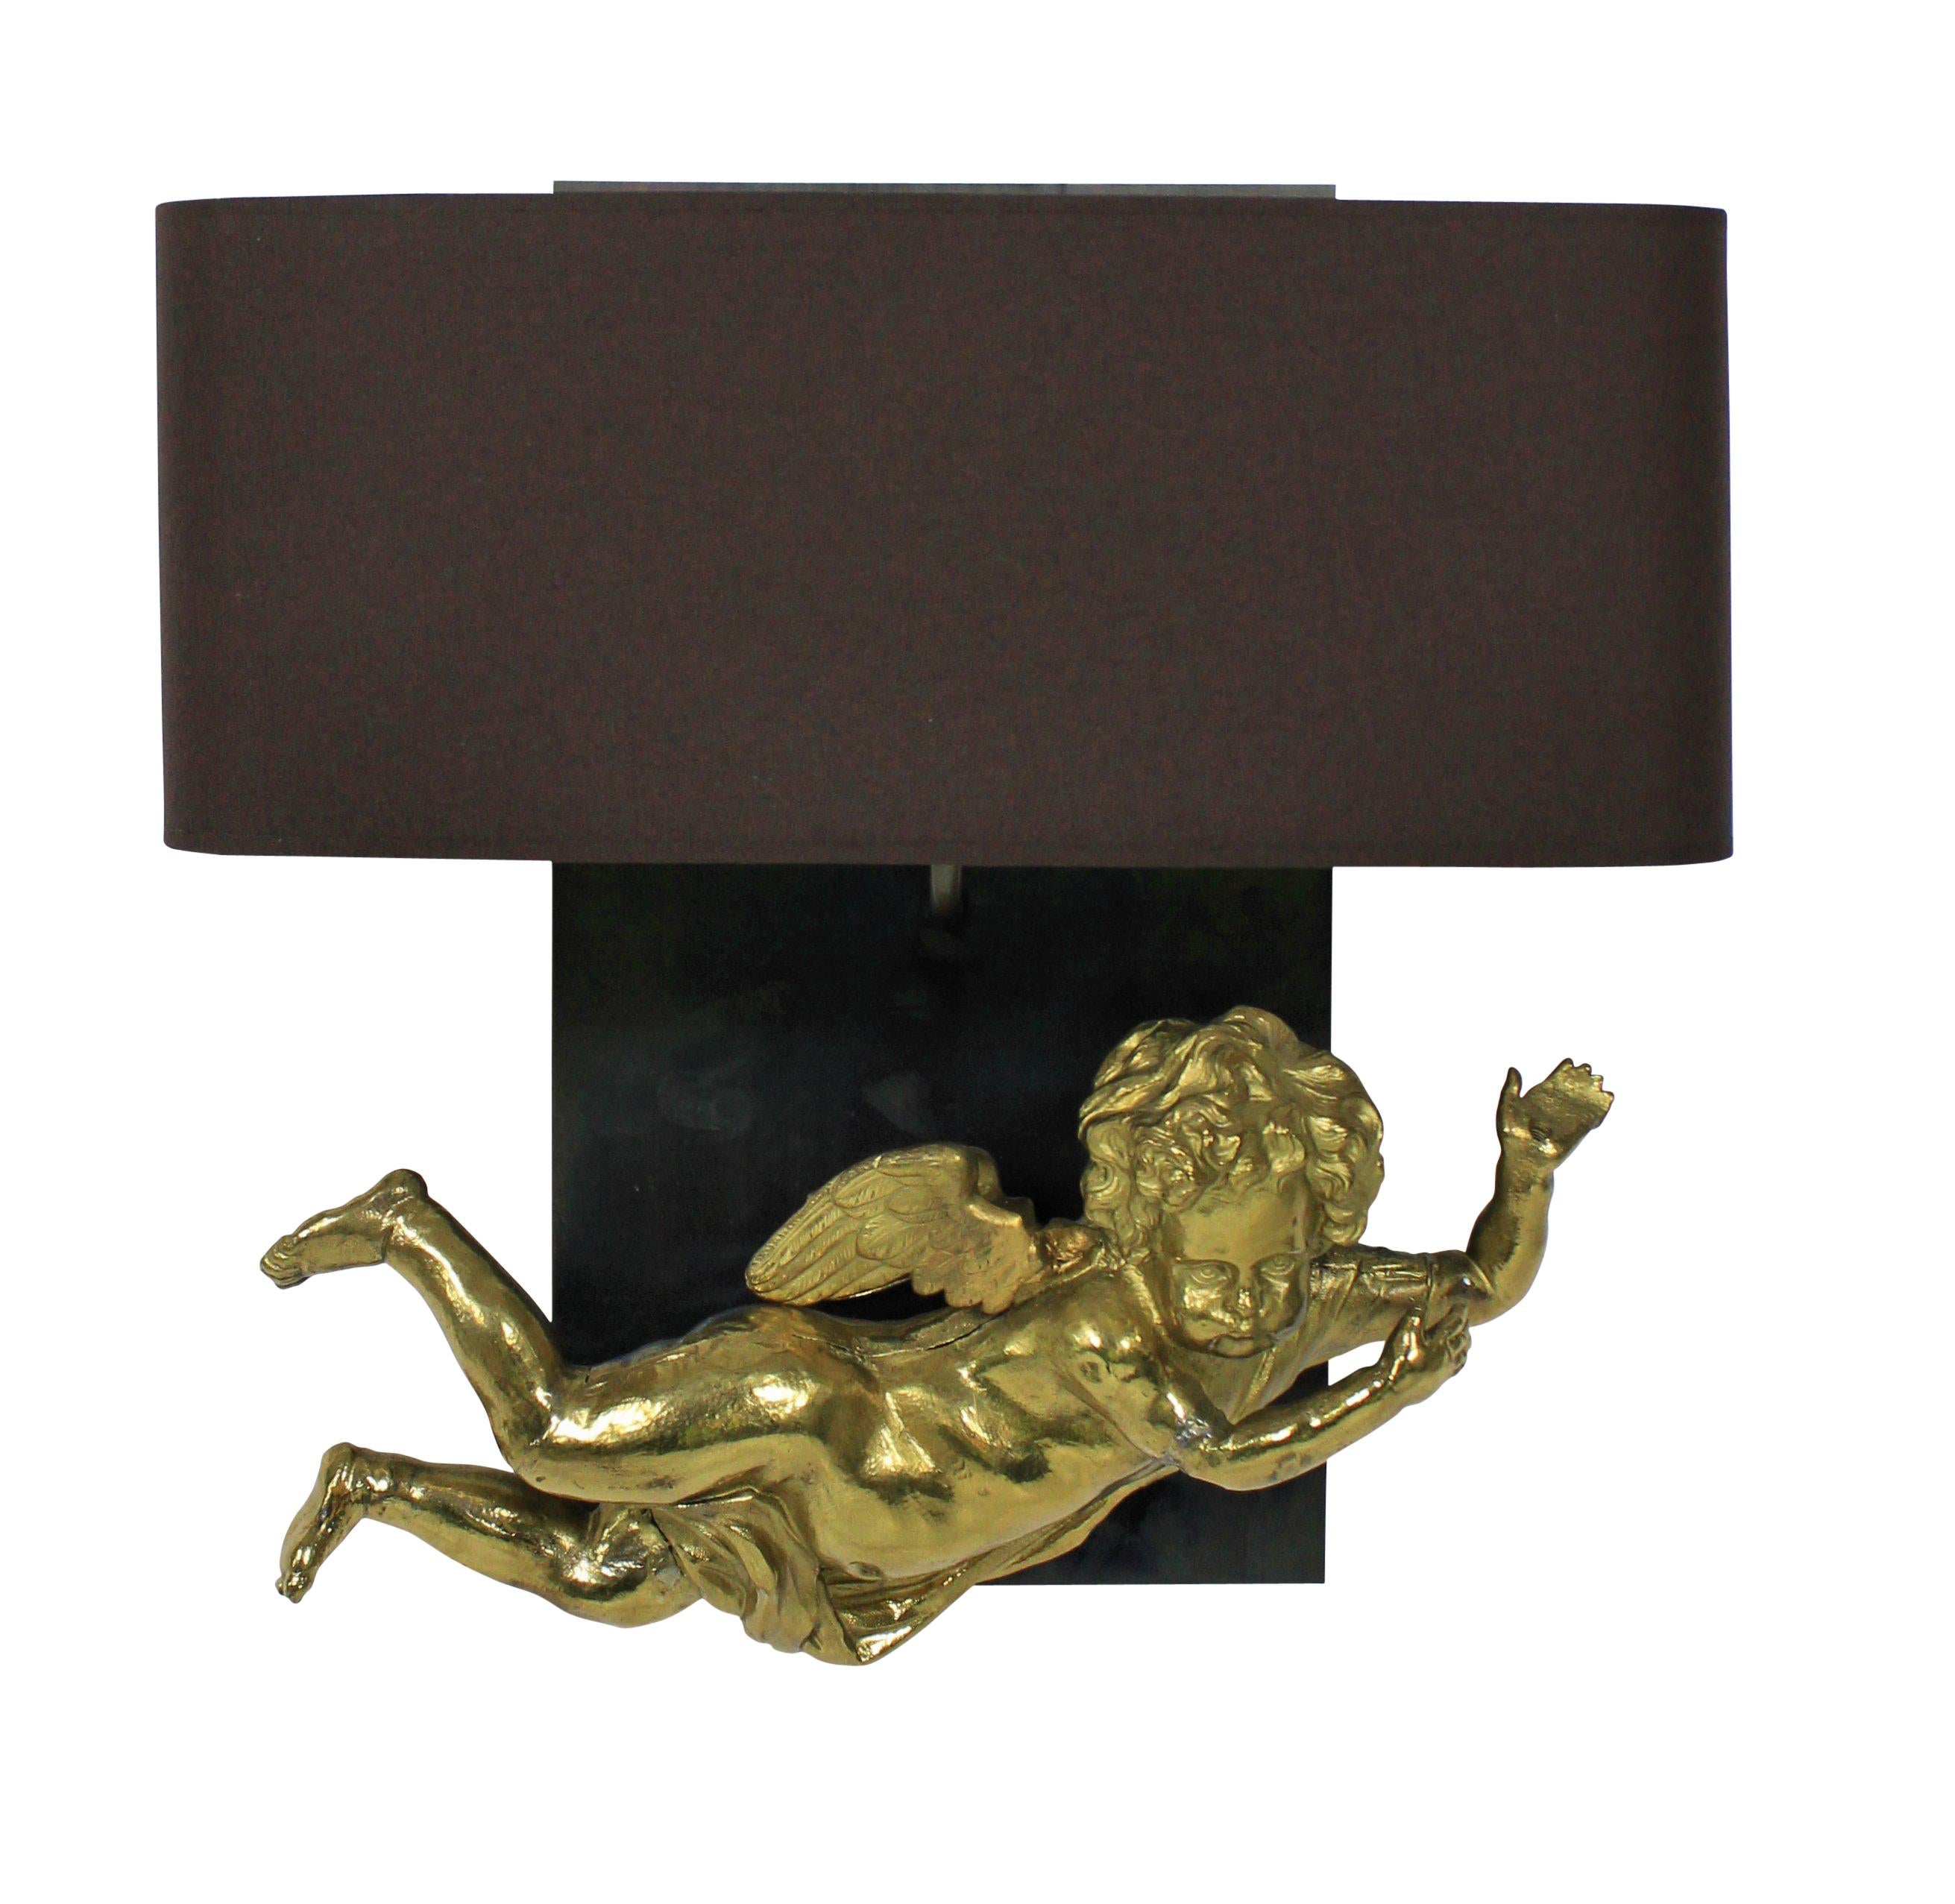 A pair of unusual French wall sconces incorporating two early 19th century gilt metal cherubs on polished steel back plates with half shades.